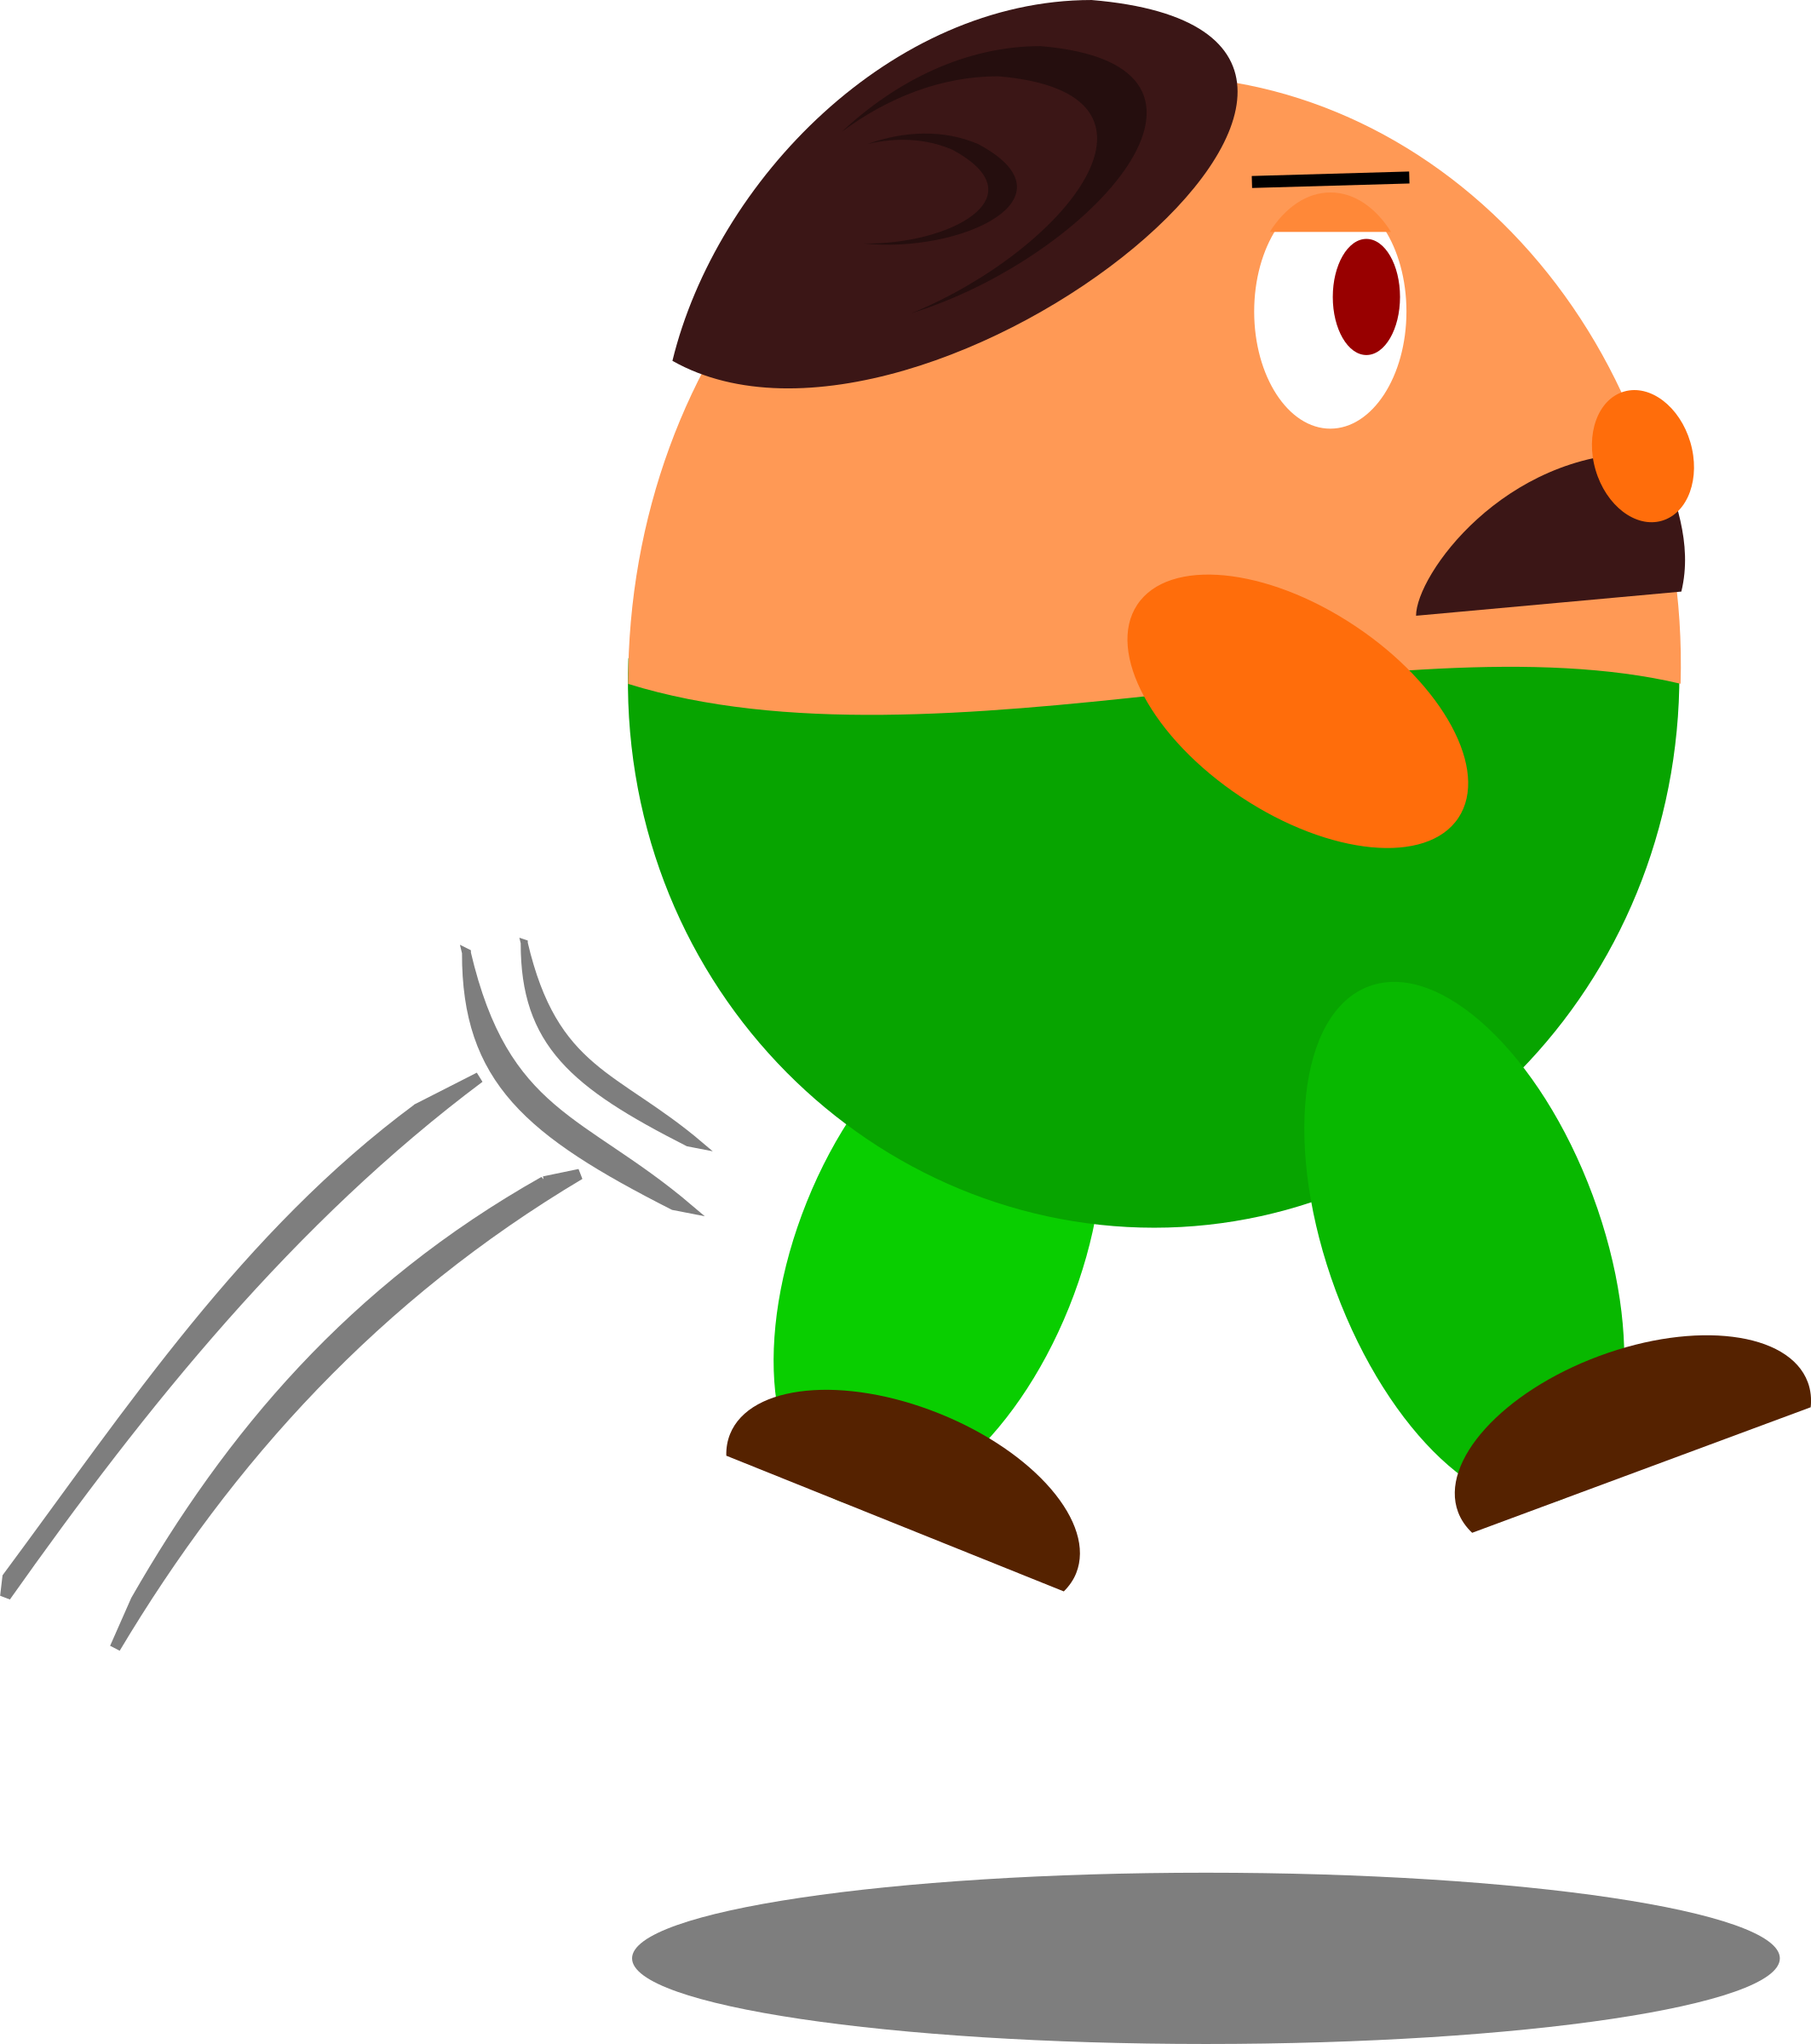 Jumping green pants guy. Toad clipart jumps